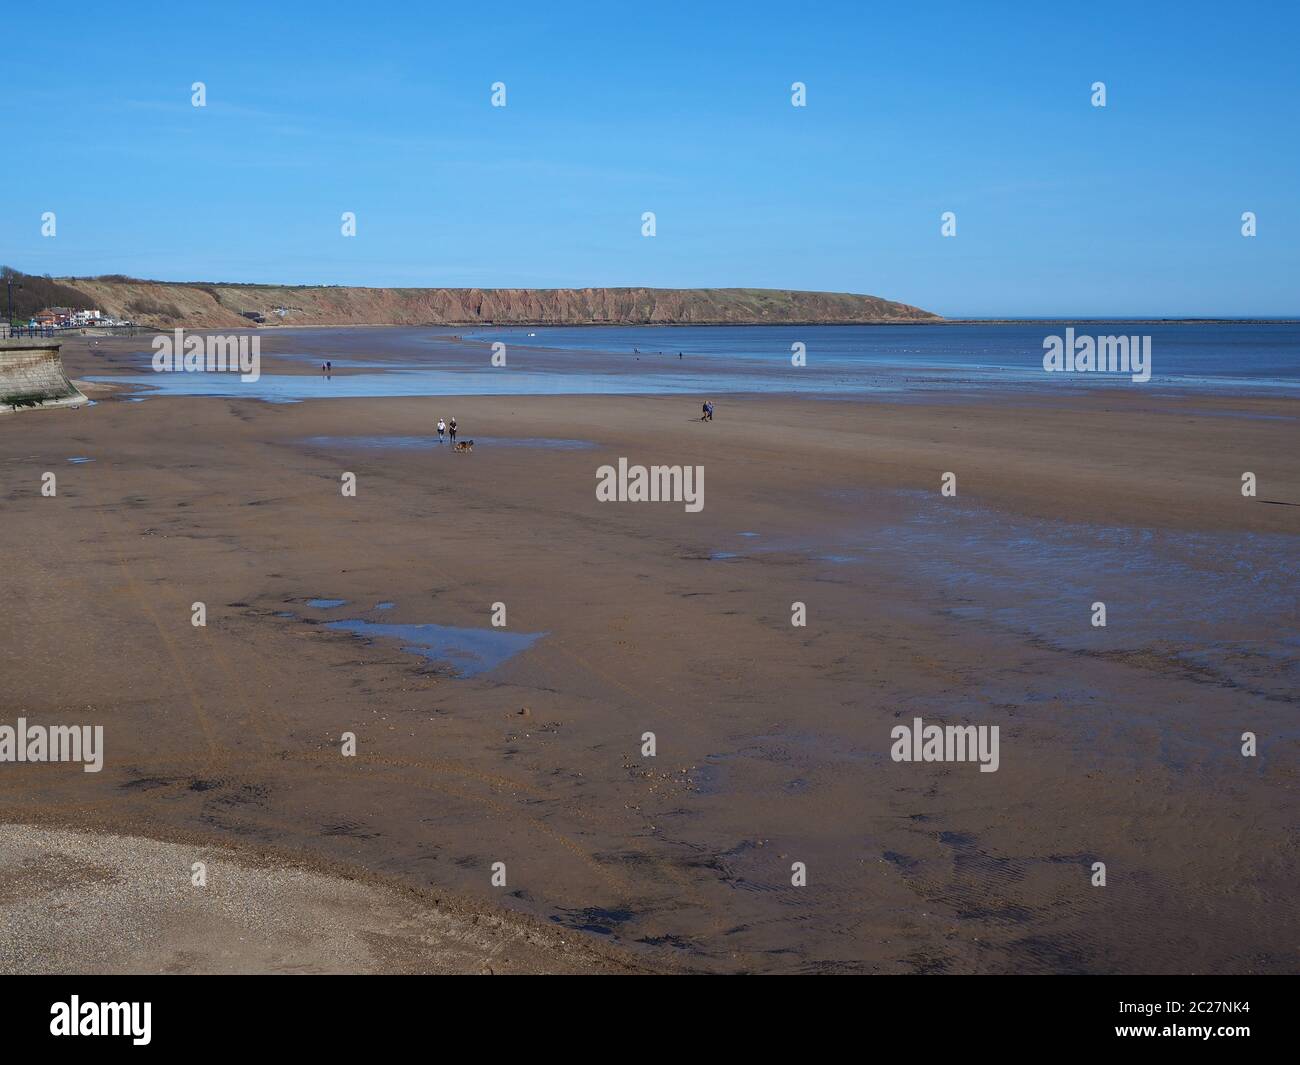 View over the sandy beach at Filey, North Yorkshire, England, towards Filey Brigg at low tide Stock Photo